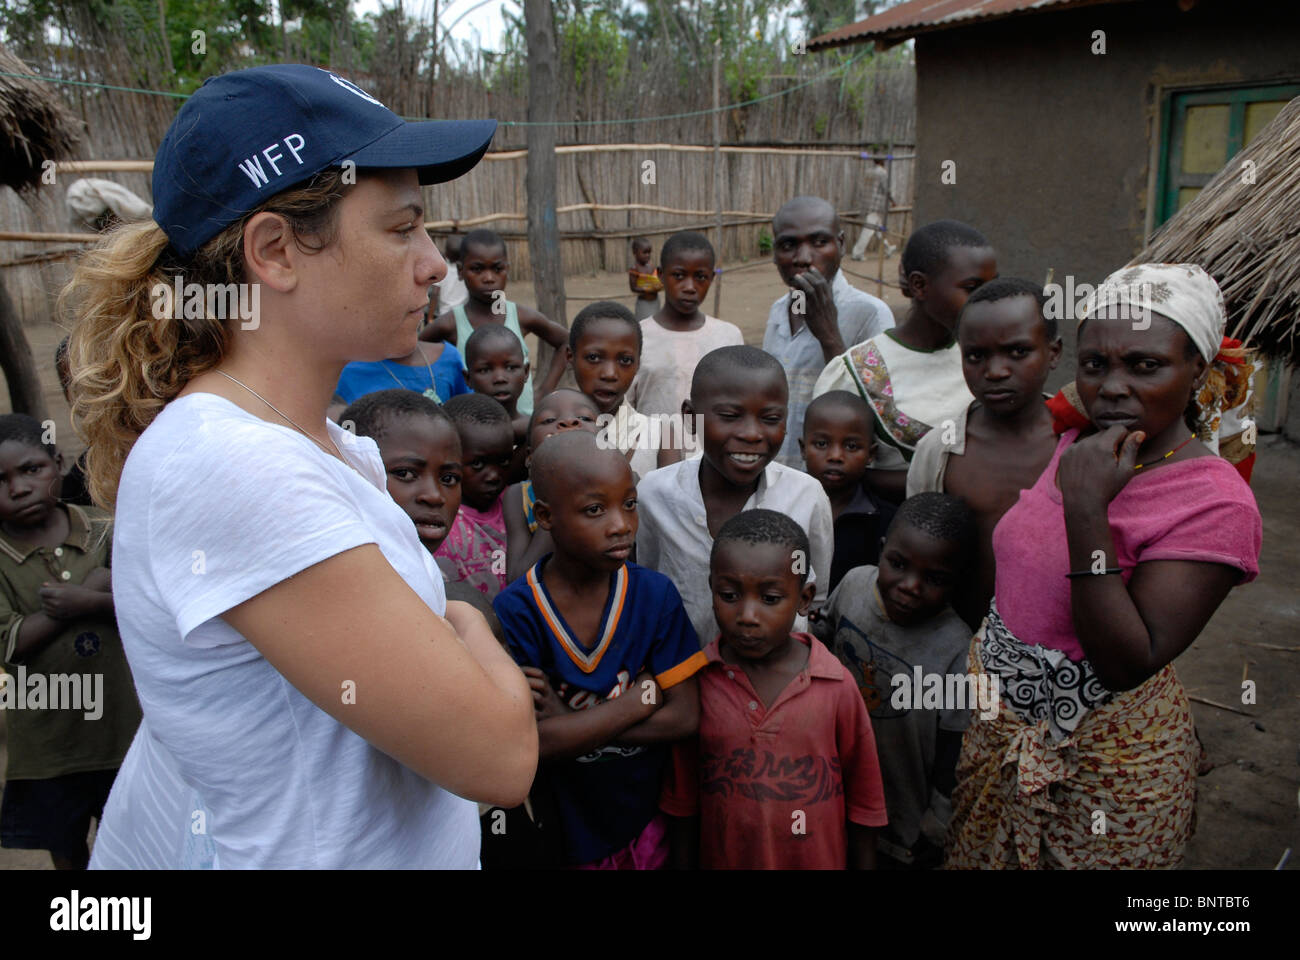 Aya Schneerson Field operations manager of World Food Programme WFP speaks to internally displaced people in an IDP camp in North Kivu province DR Congo Africa Stock Photo